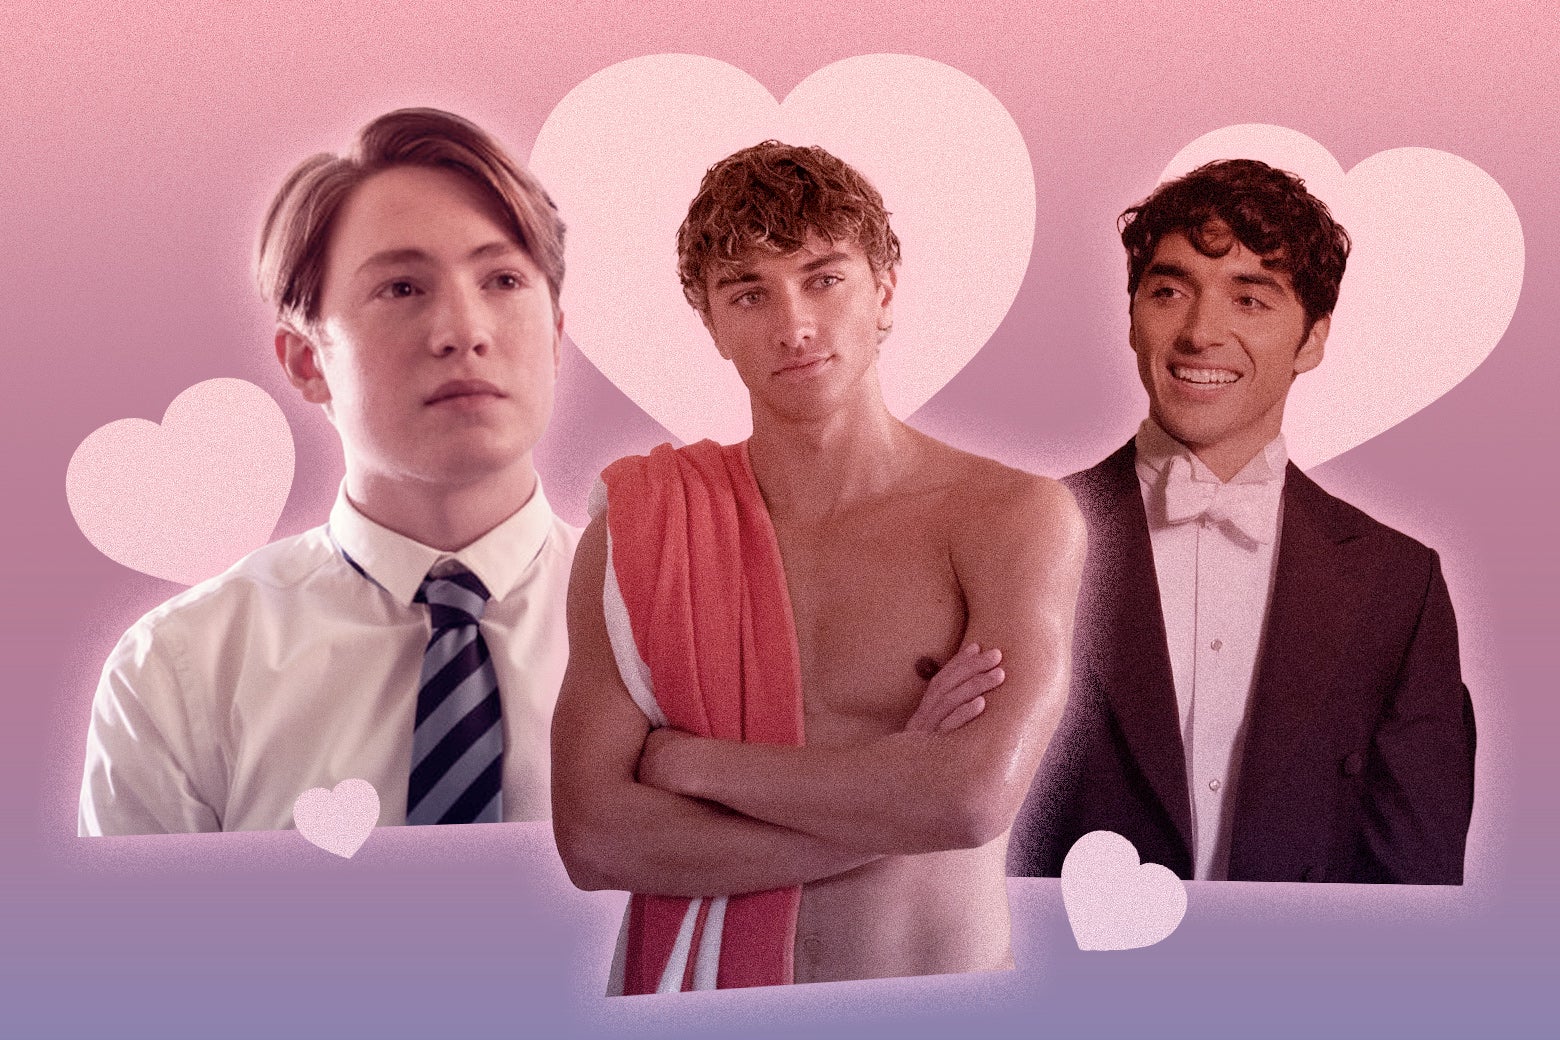 Nick Nelson, Jeremiah Fisher, and Alex Claremont-Diaz on a pink, purple, and blue background with hearts.